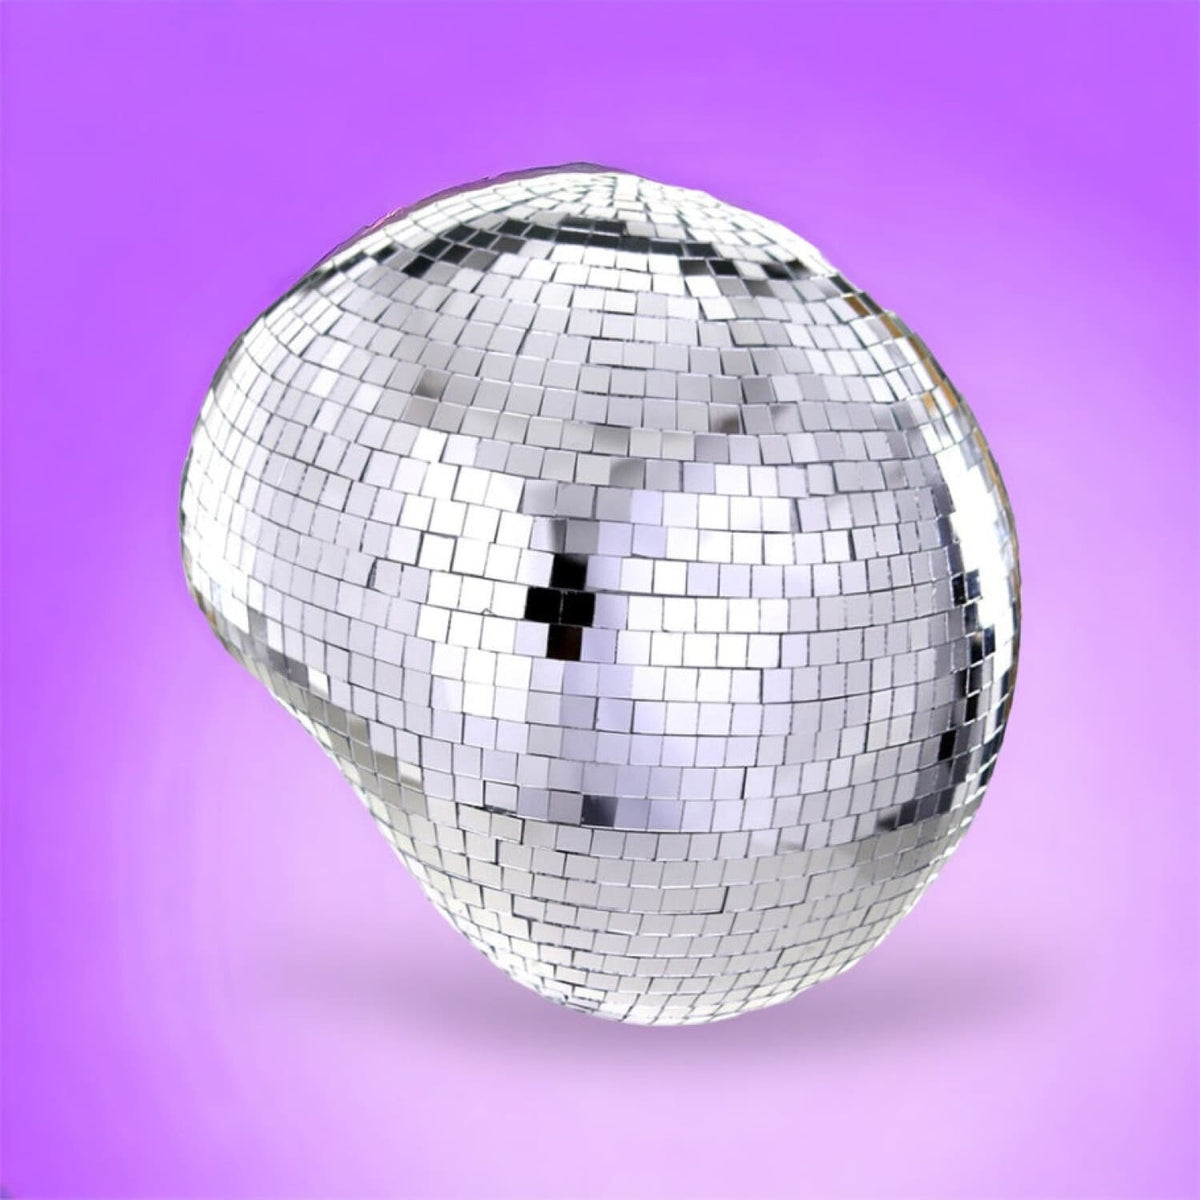 Melting Disco Ball Sculpture 70s - Birthday Gifts - Disco